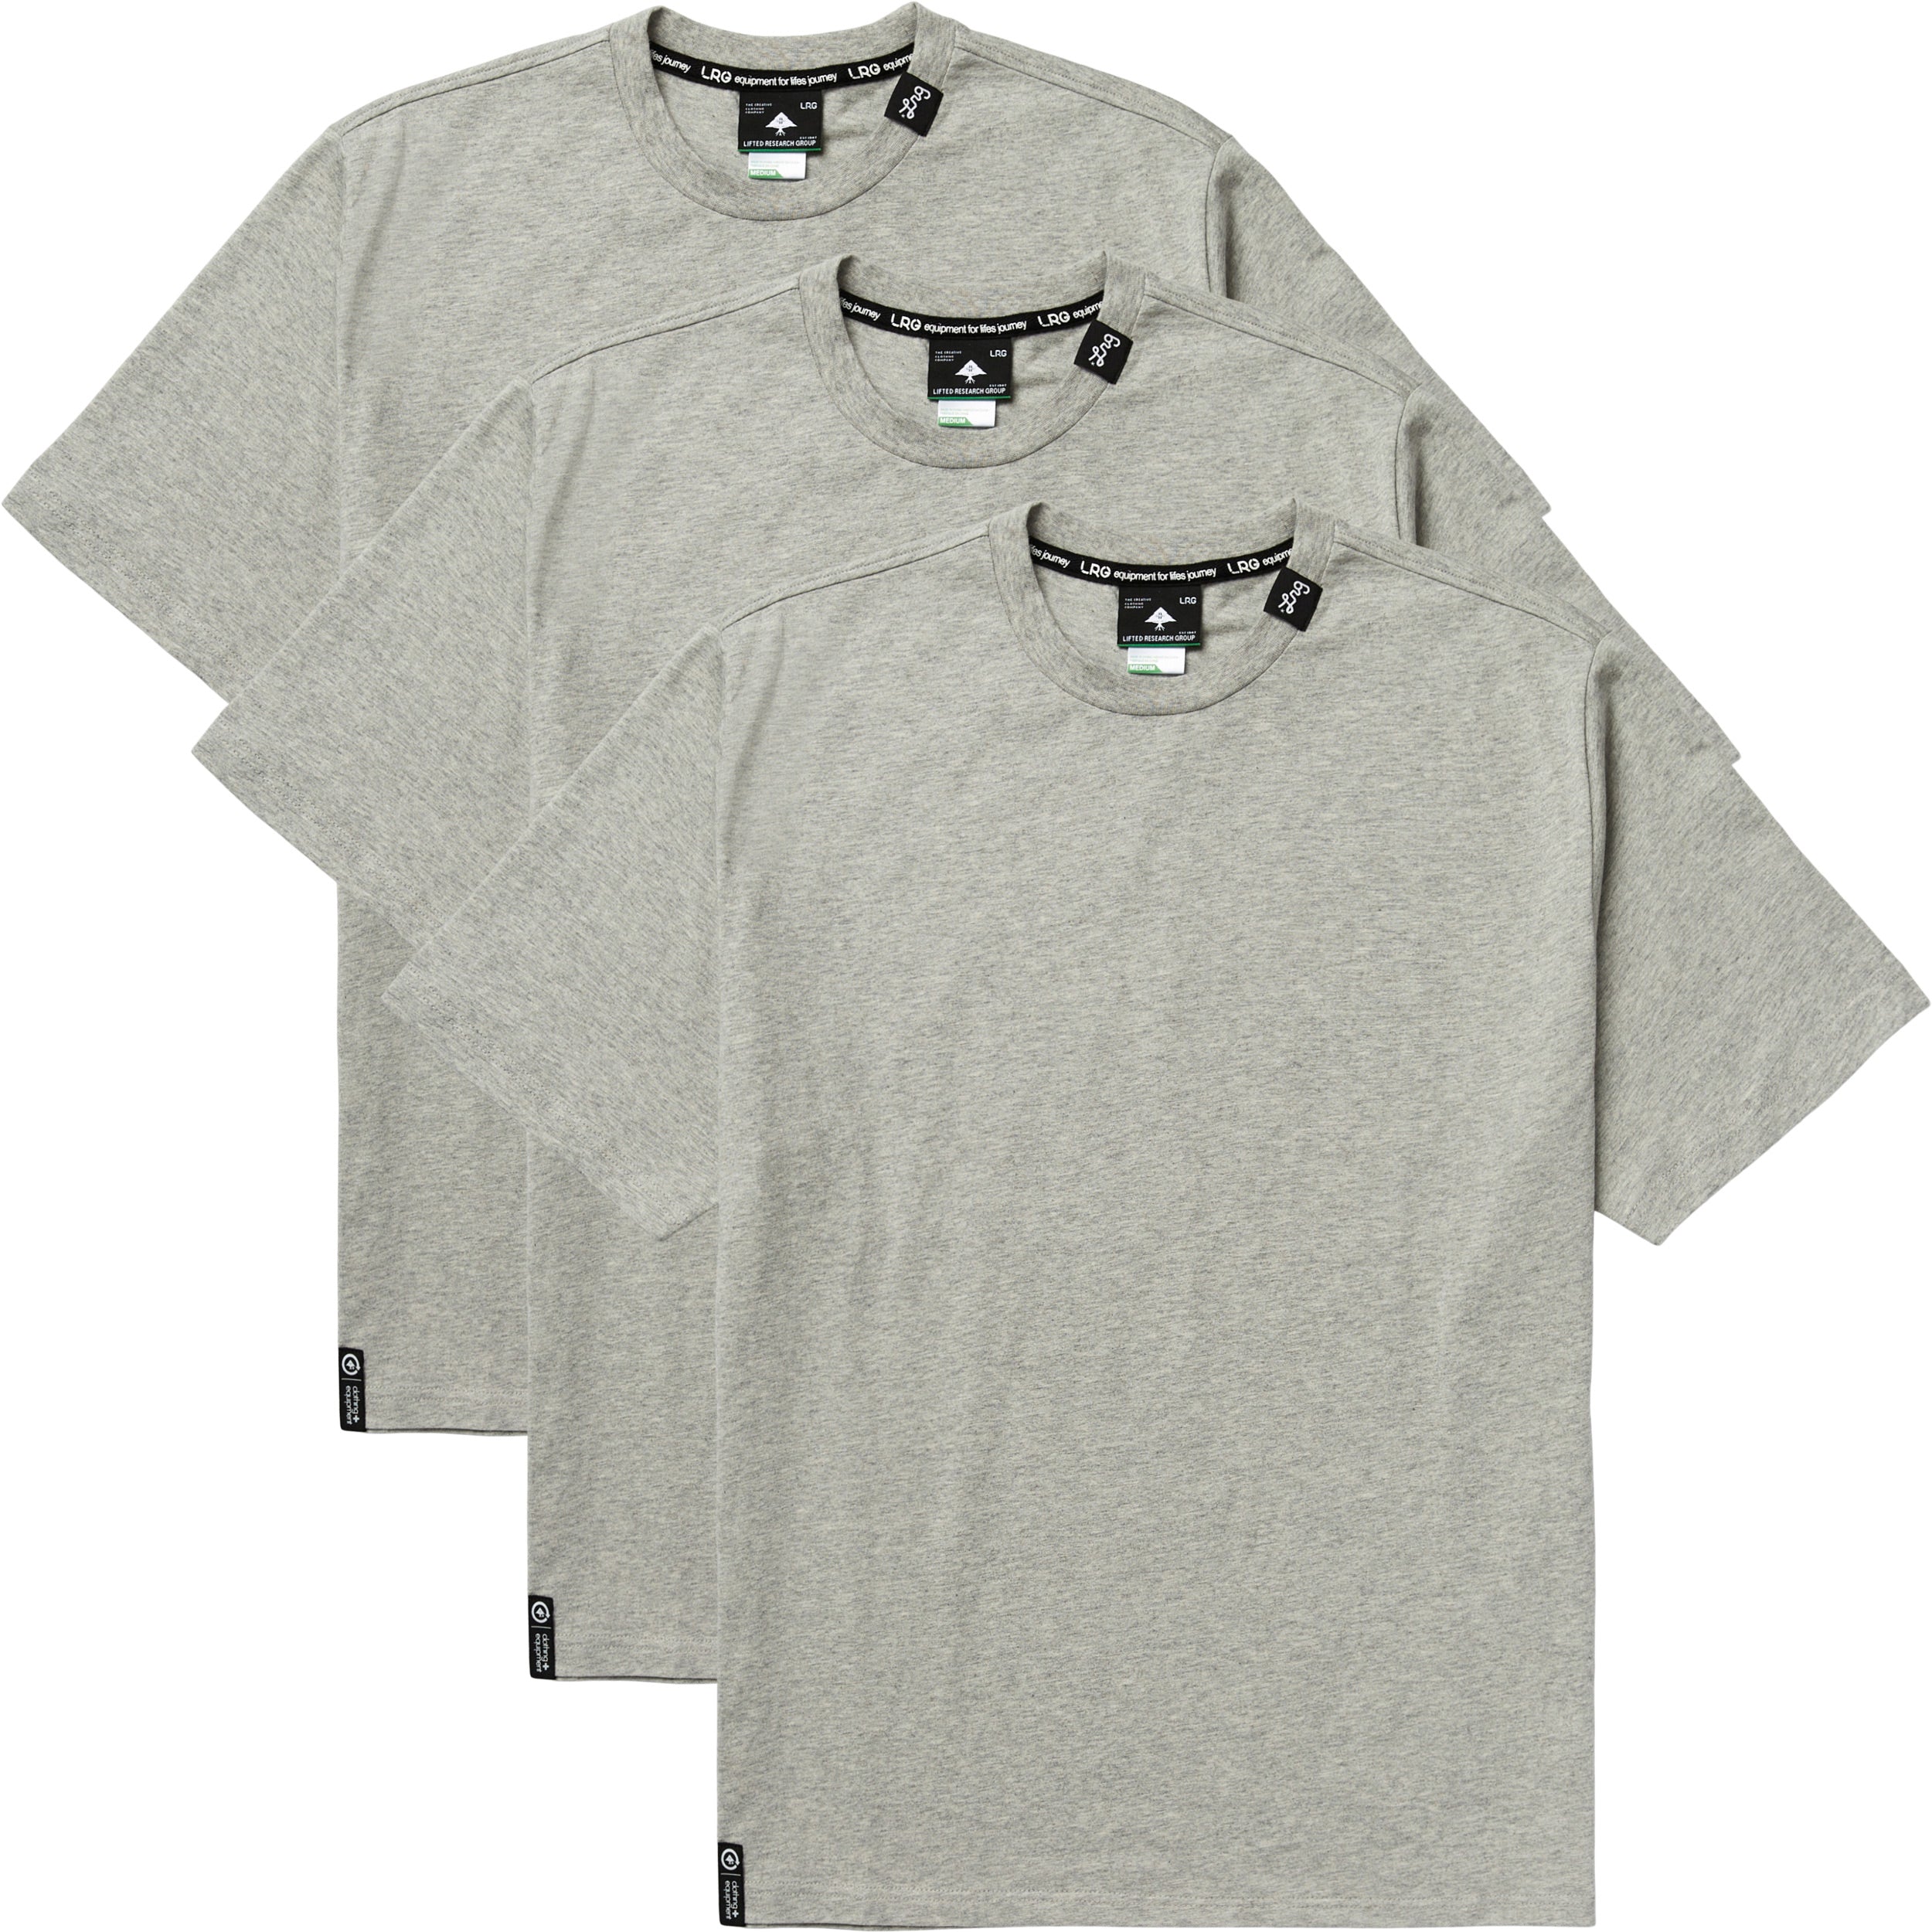 STRONG PACK TEE GREY sizeS ours アワーズ - dzhistory.com